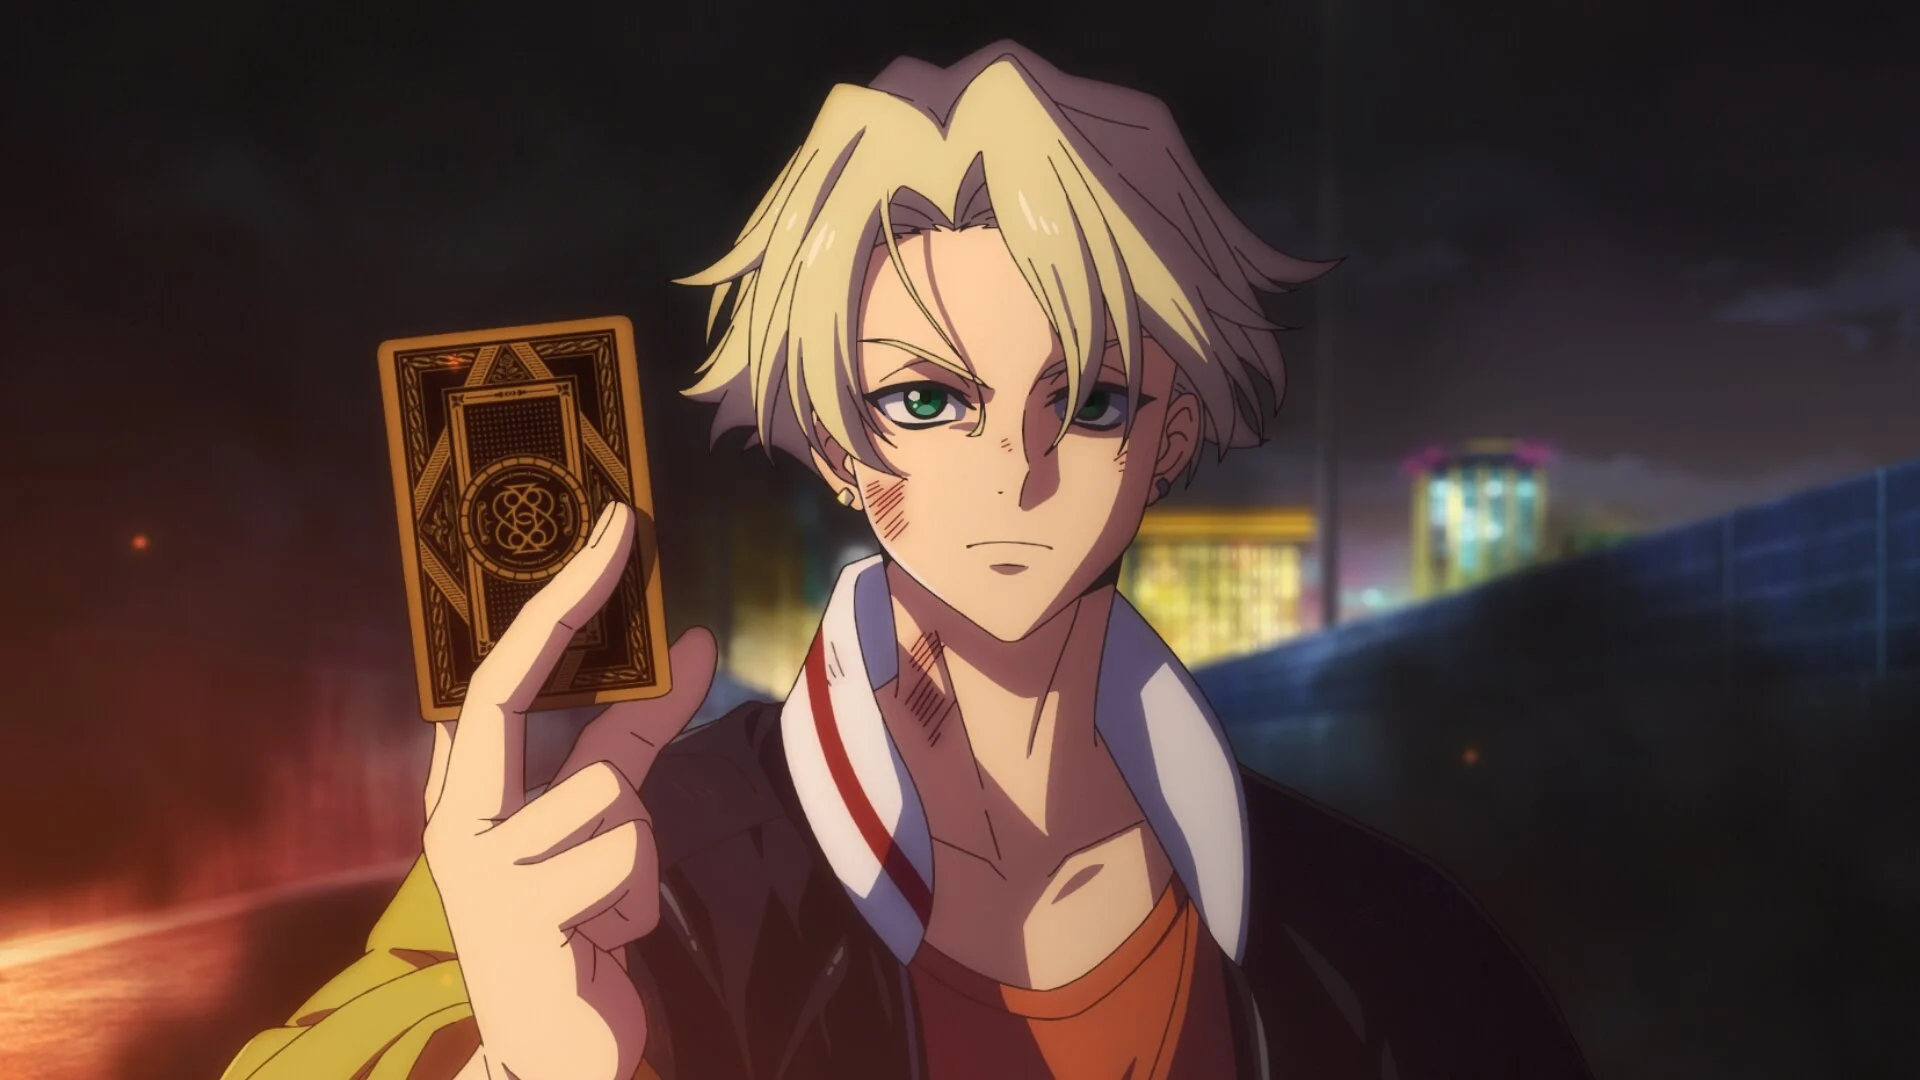 High Card' Anime Series Opening Theme and Characters Revealed